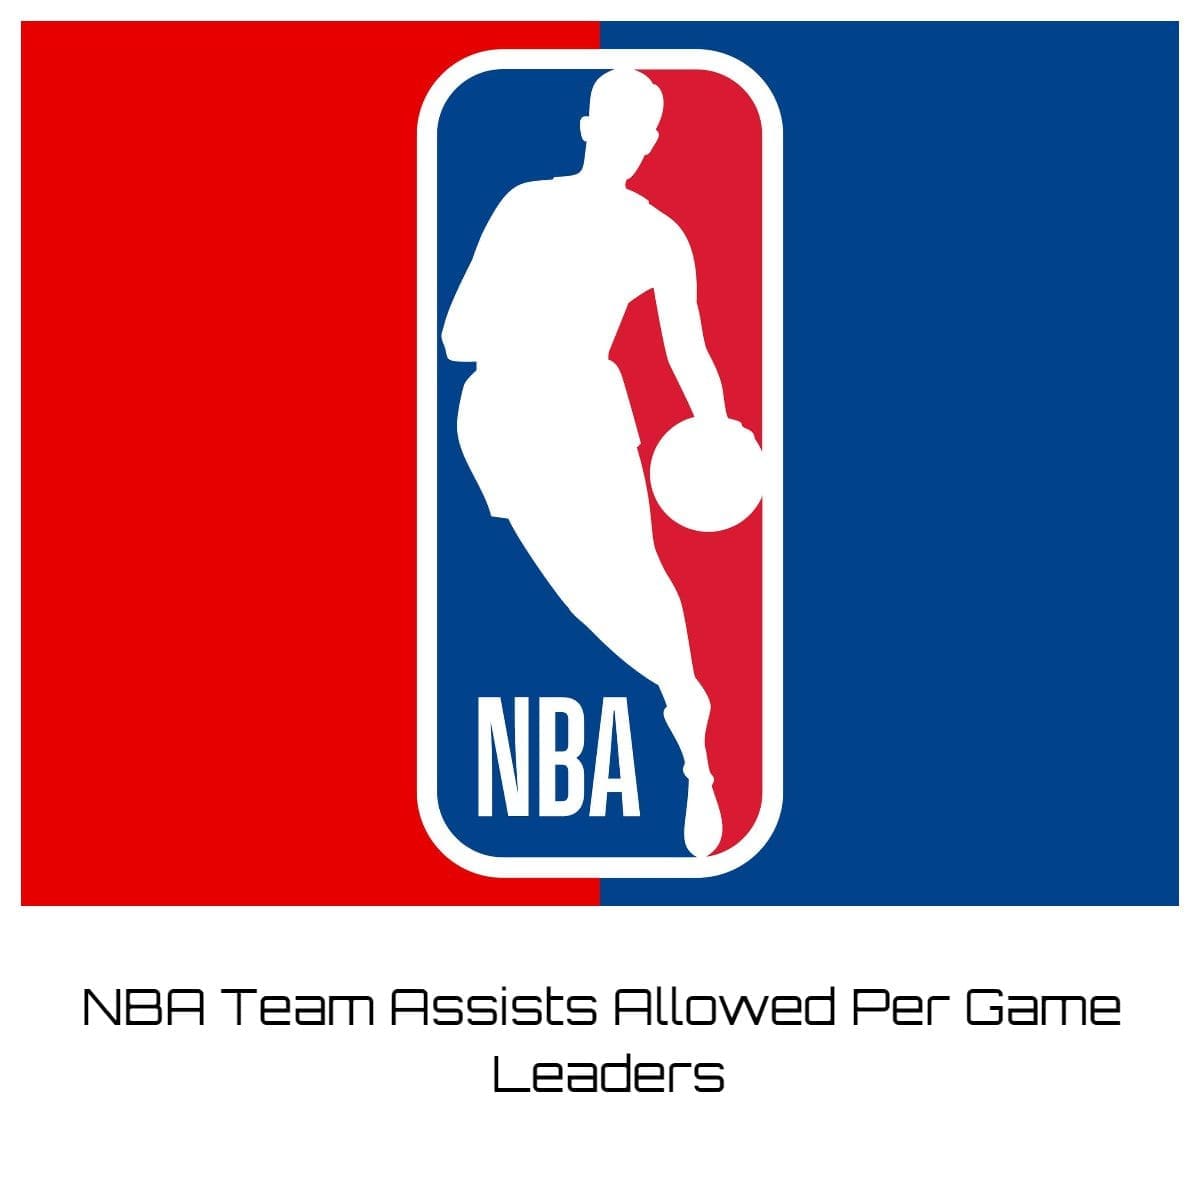 NBA Team Assists Allowed Per Game Leaders